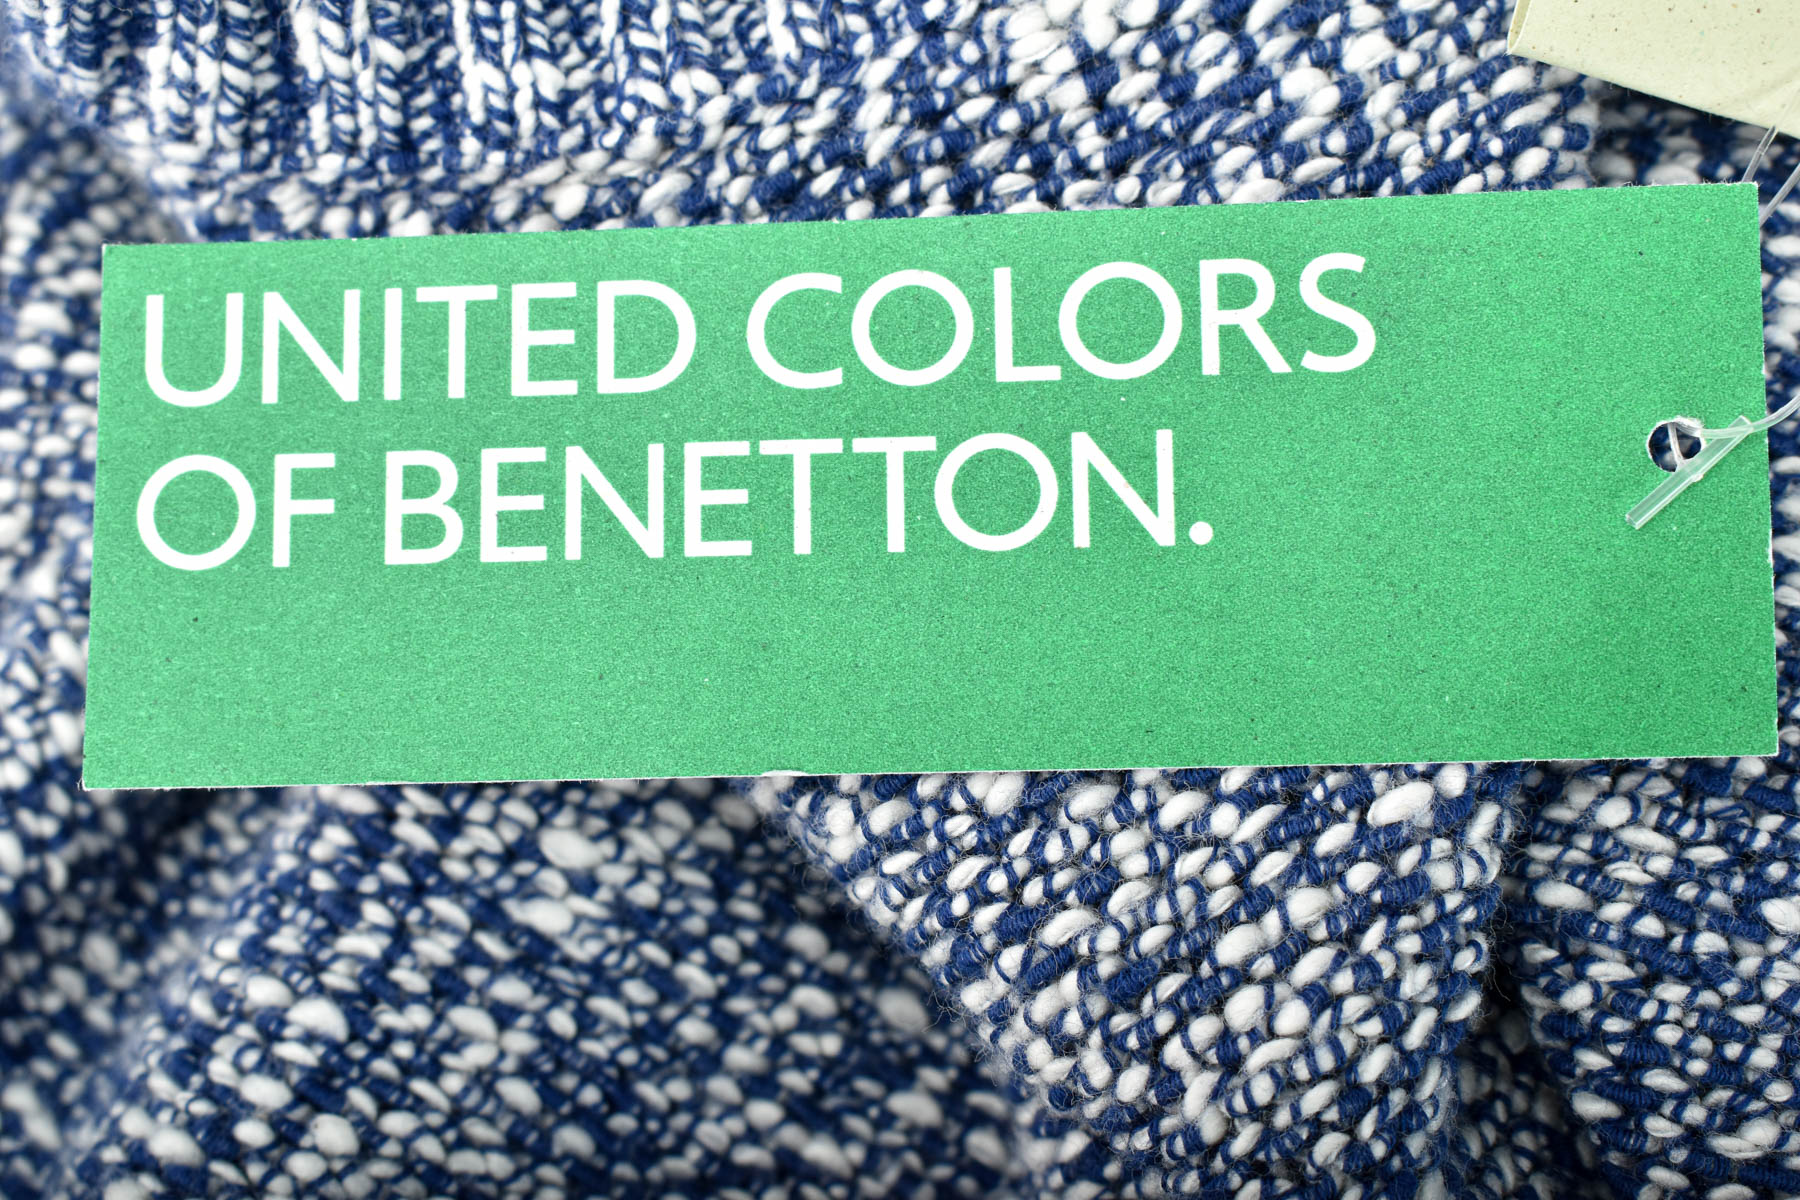 Sweaters for Boy - United Colors of Benetton - 2